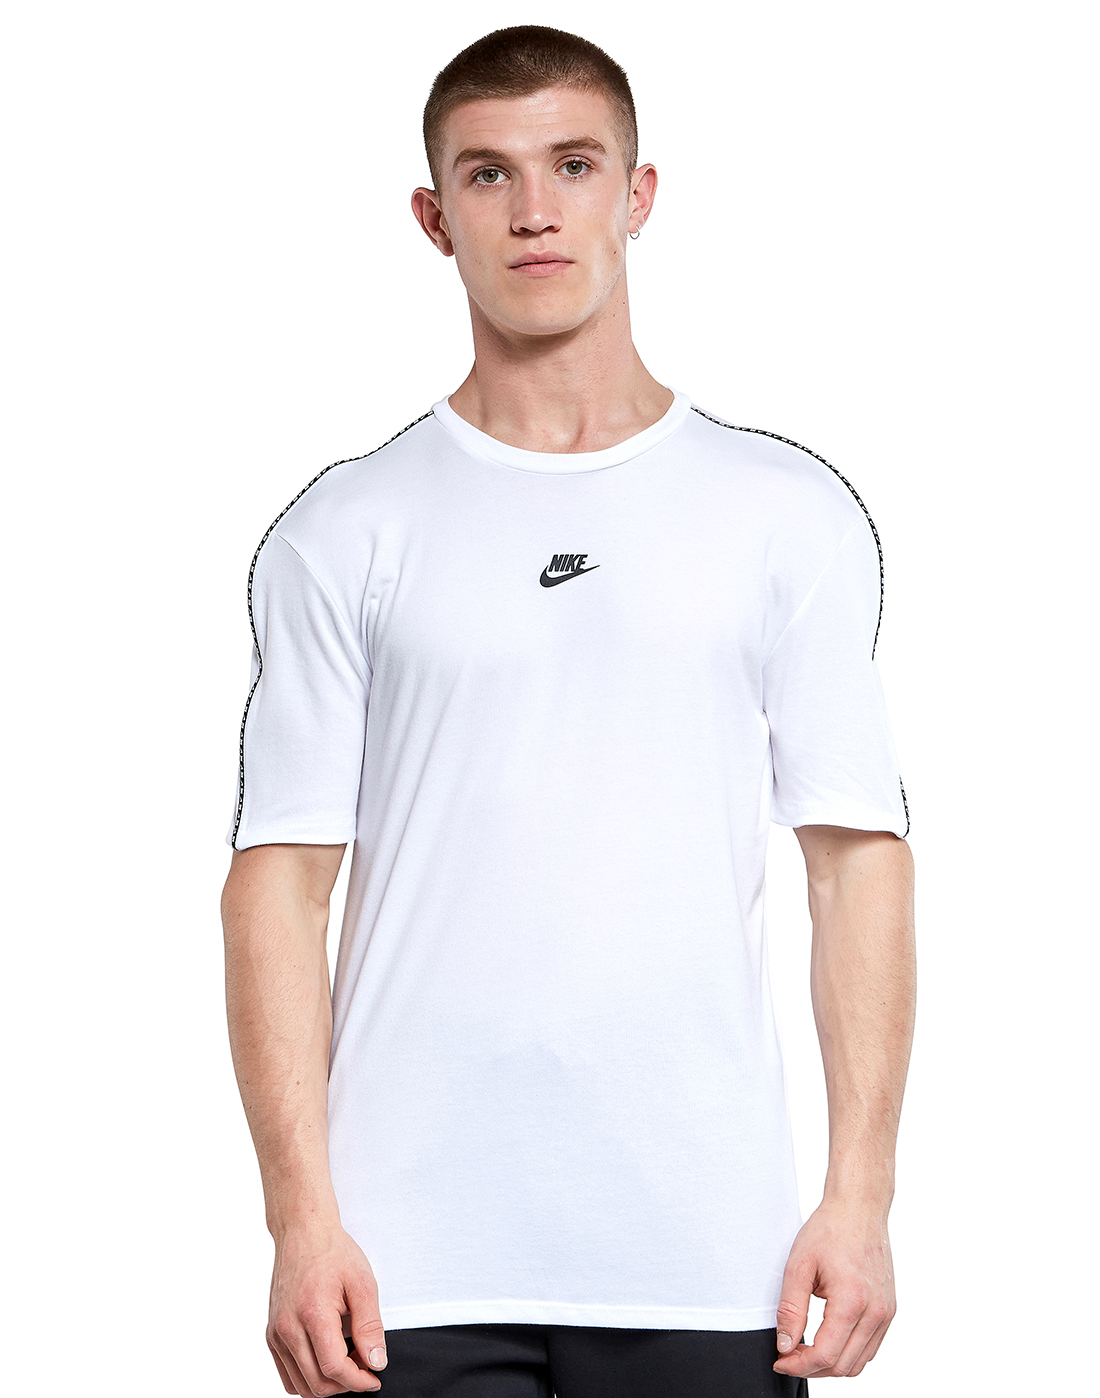 Nike Mens Repeat T-Shirt - White | Life Style Sports IE